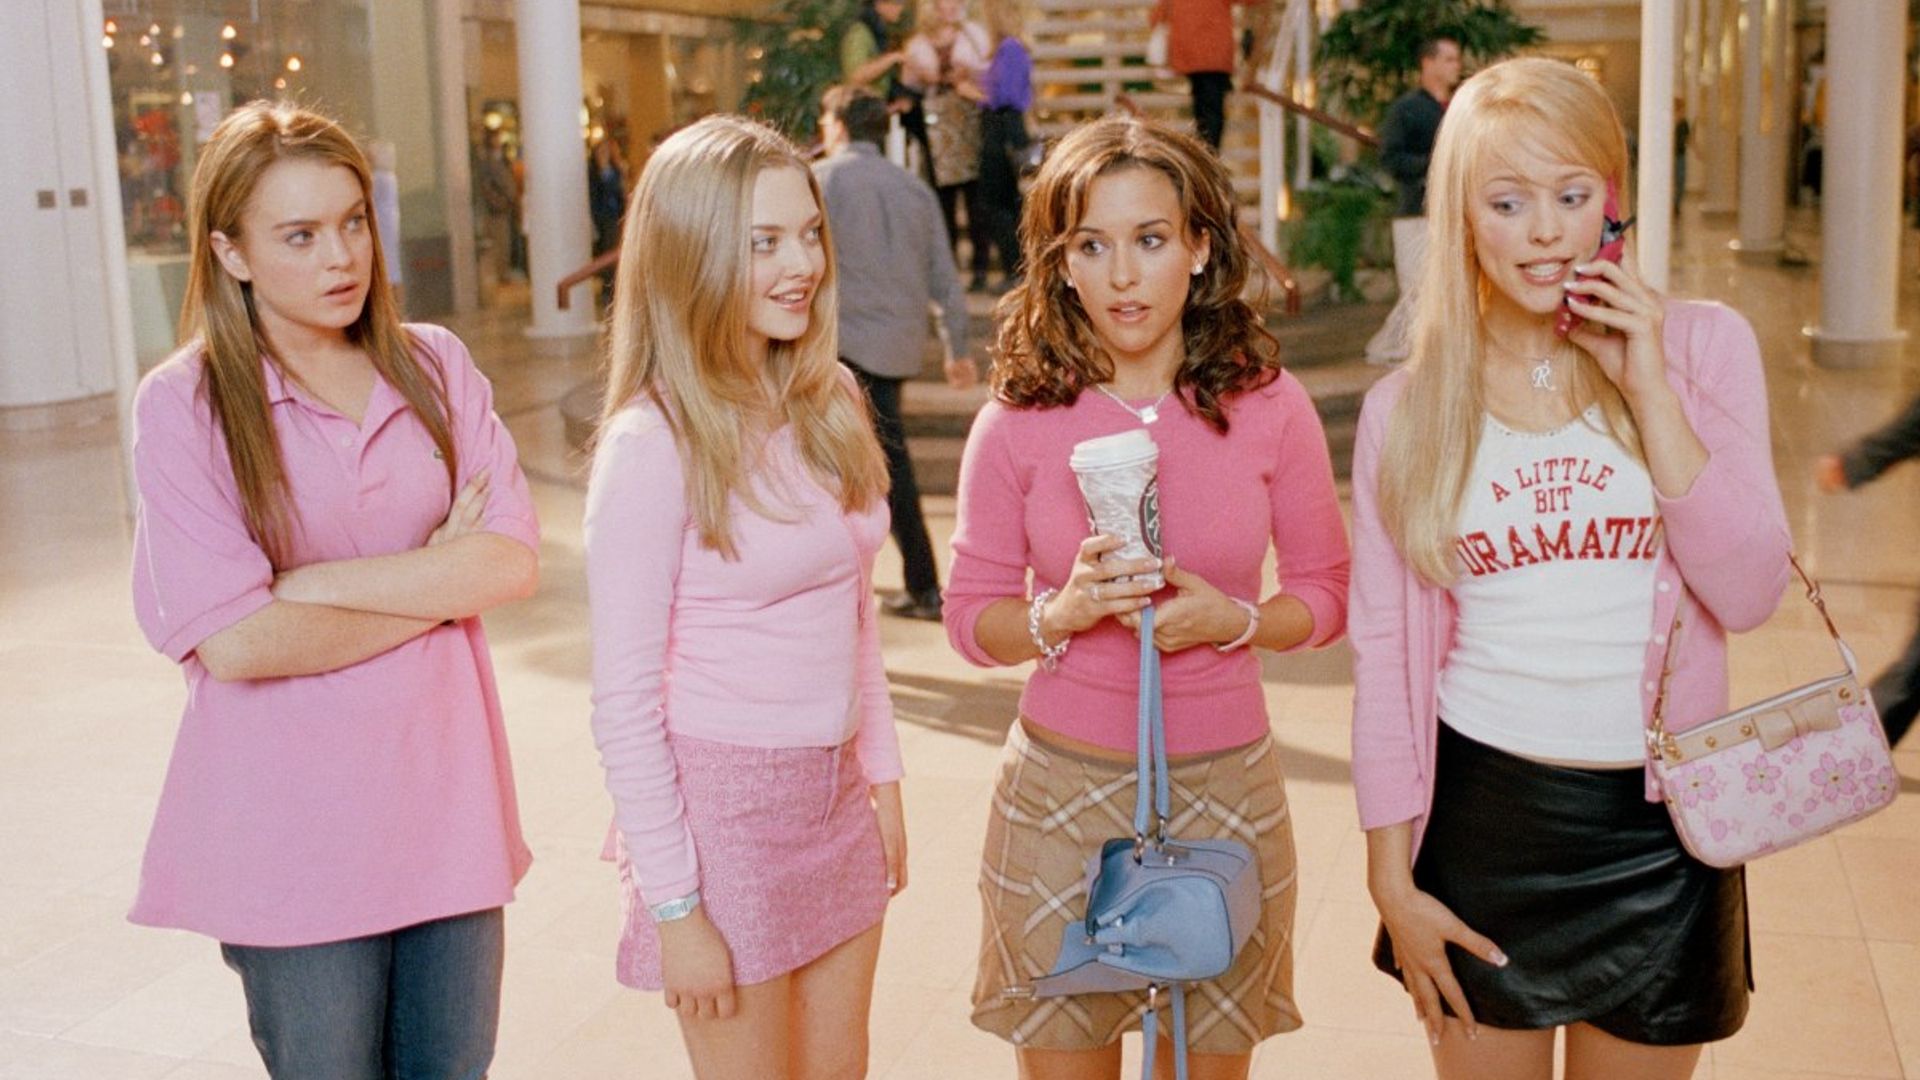 Amanda Seyfried shares rare Mean Girls throwback pictures